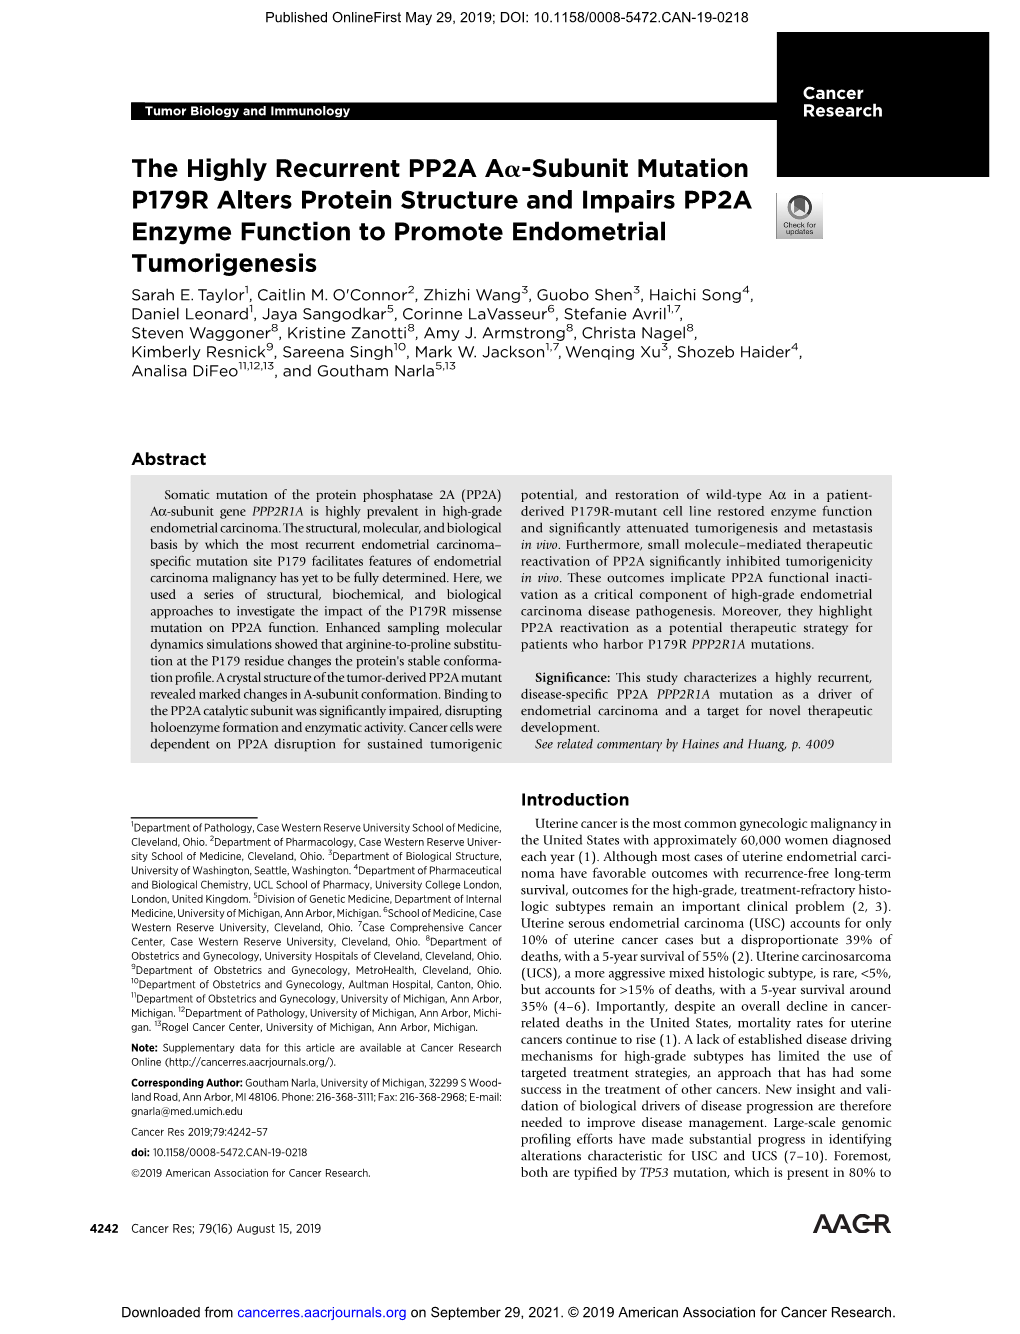 The Highly Recurrent PP2A Aa-Subunit Mutation P179R Alters Protein Structure and Impairs PP2A Enzyme Function to Promote Endometrial Tumorigenesis Sarah E